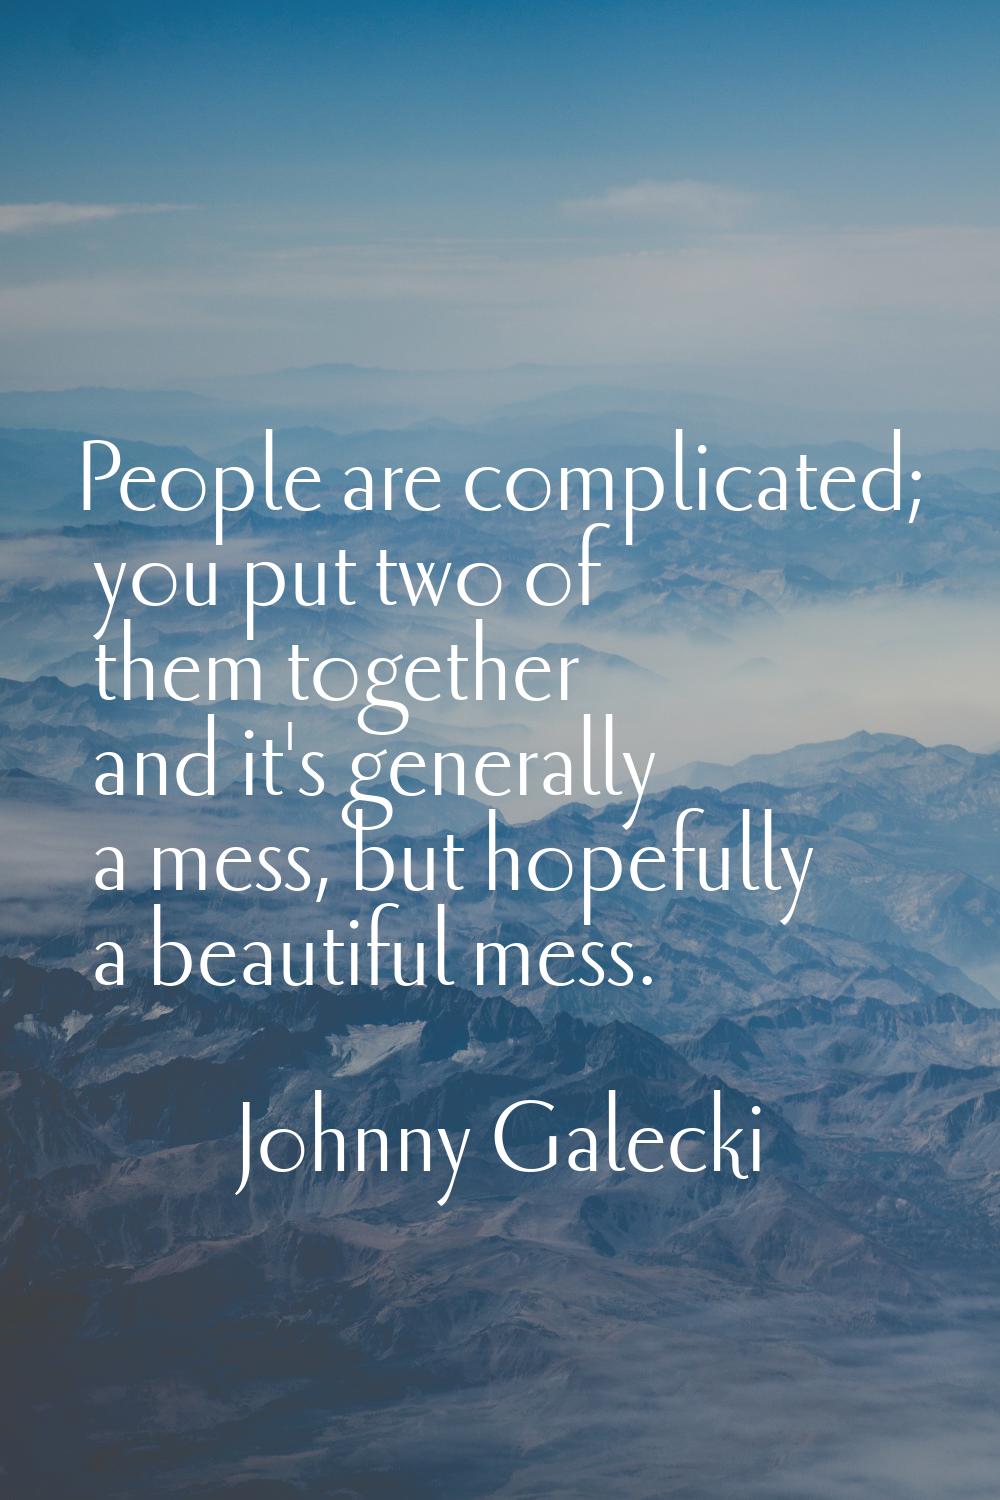 People are complicated; you put two of them together and it's generally a mess, but hopefully a bea